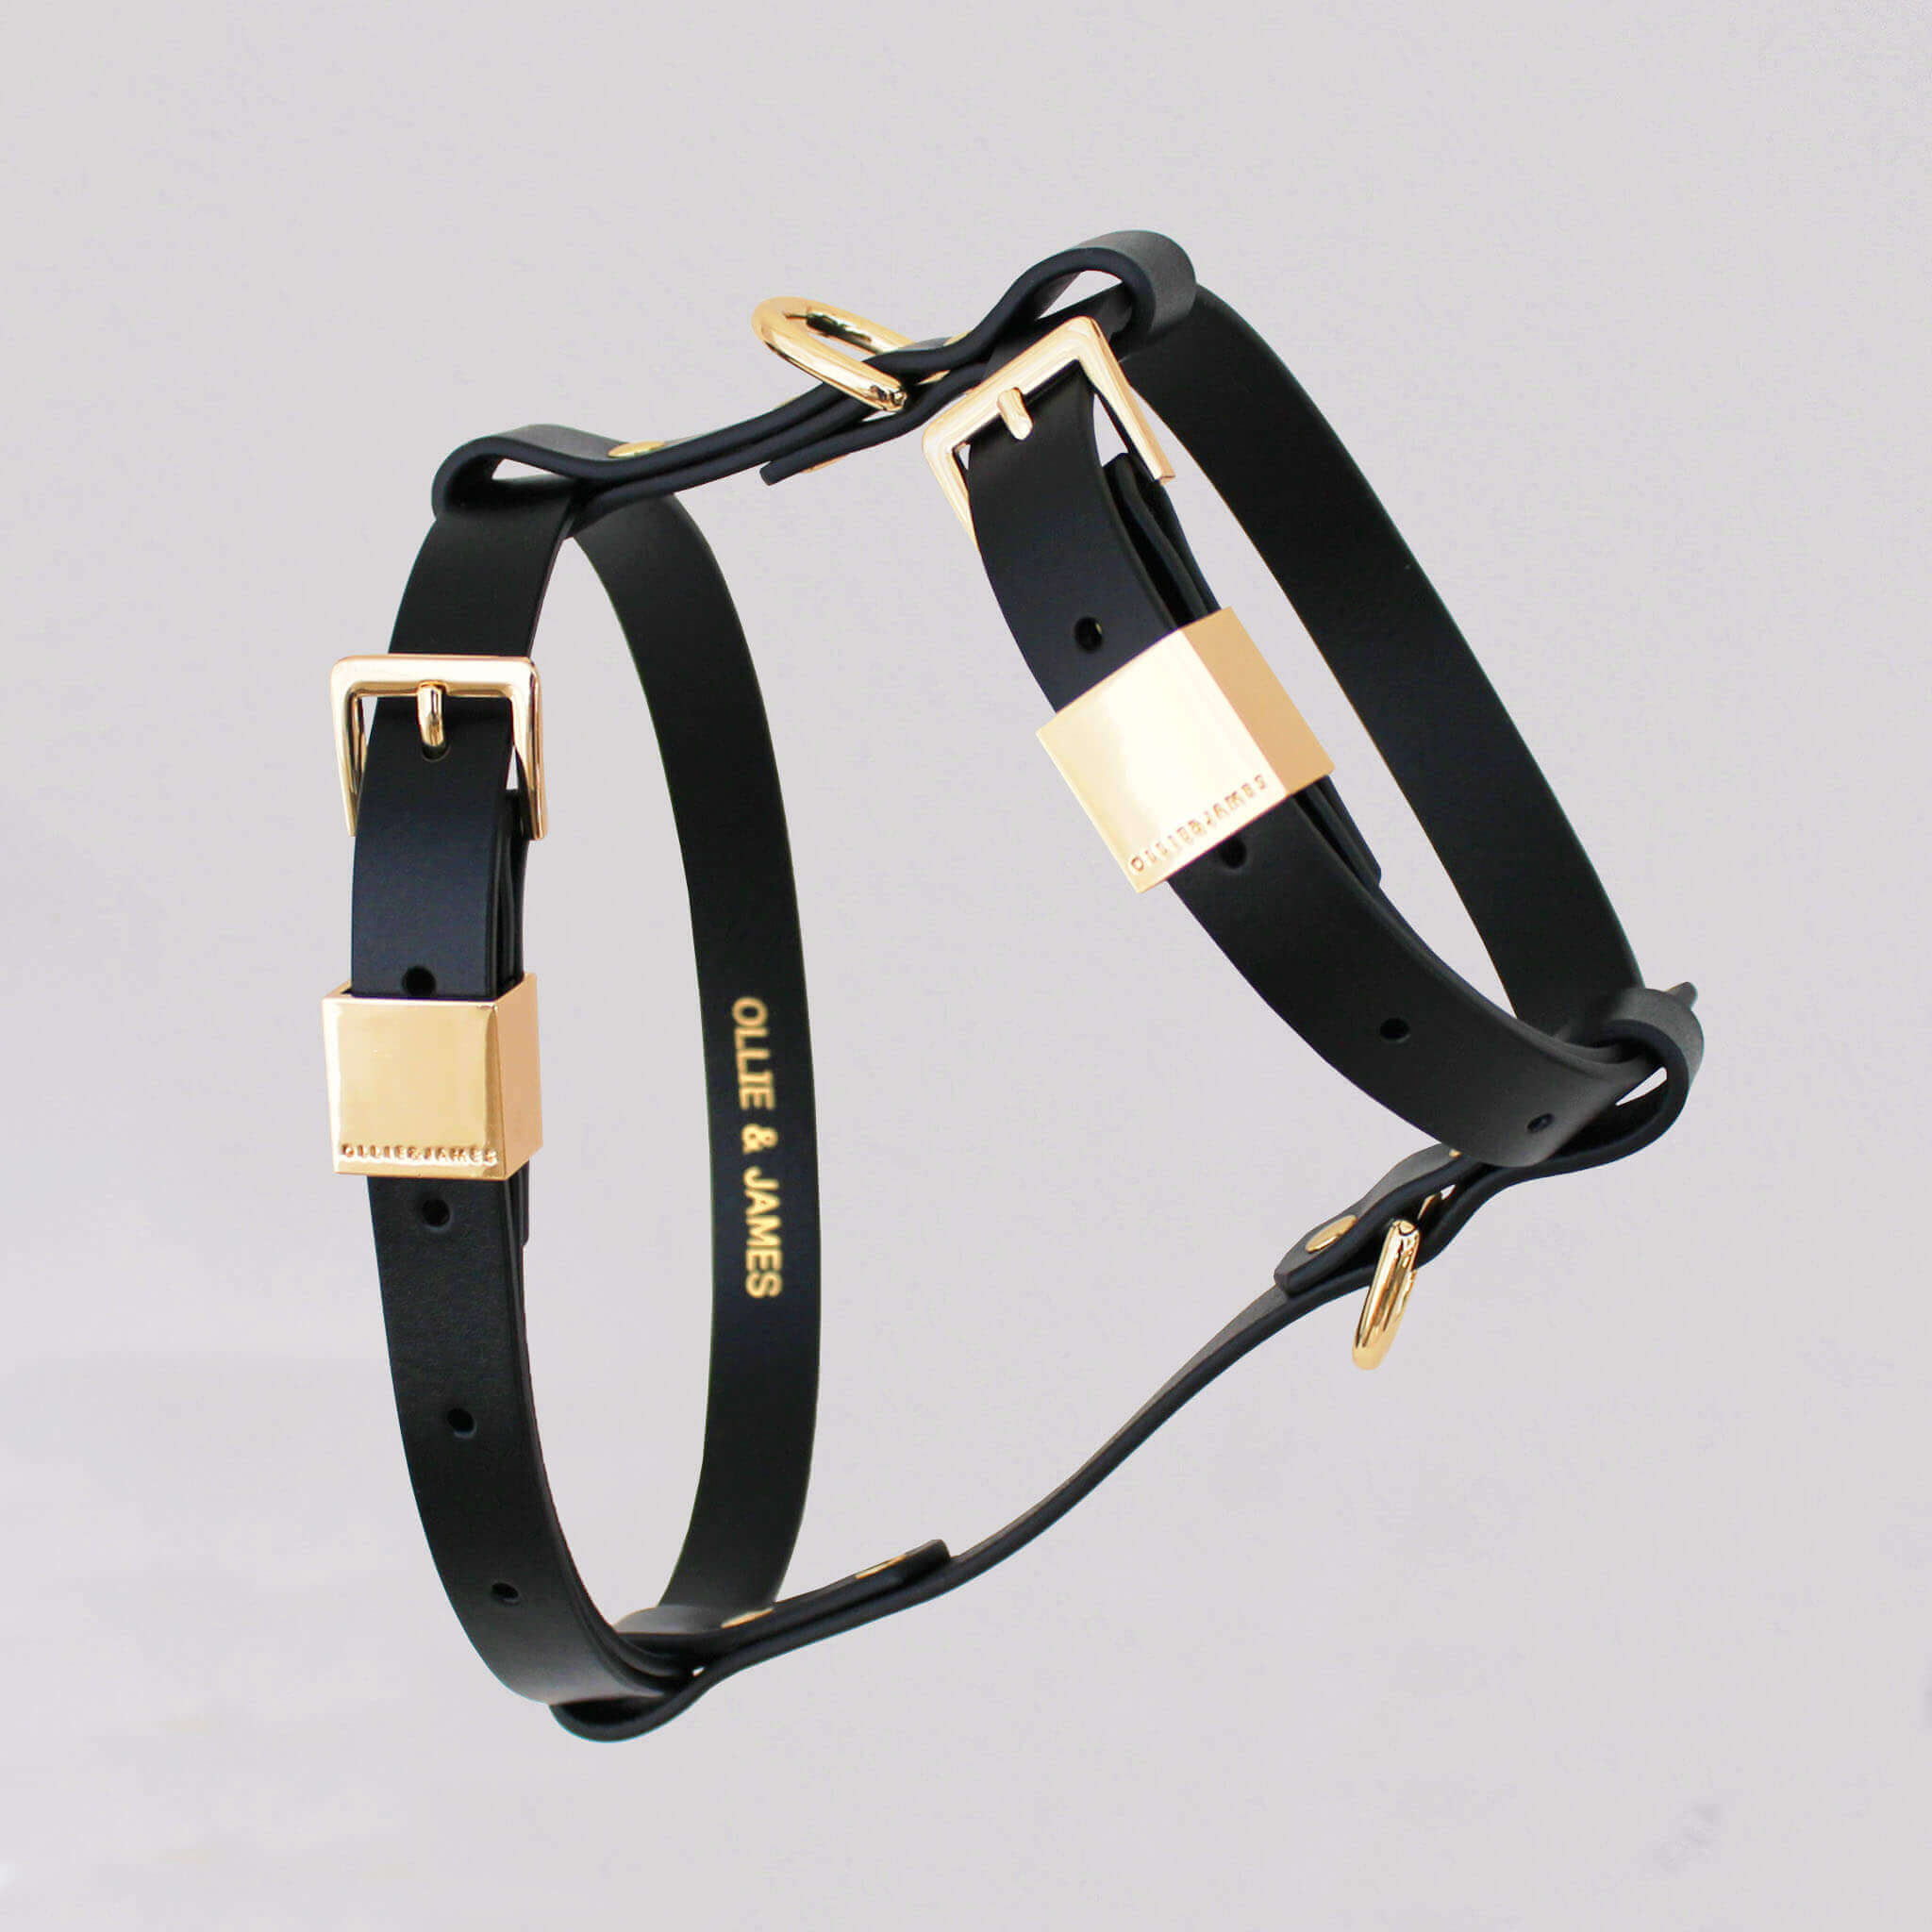 Luxury leather dog harness in sable.